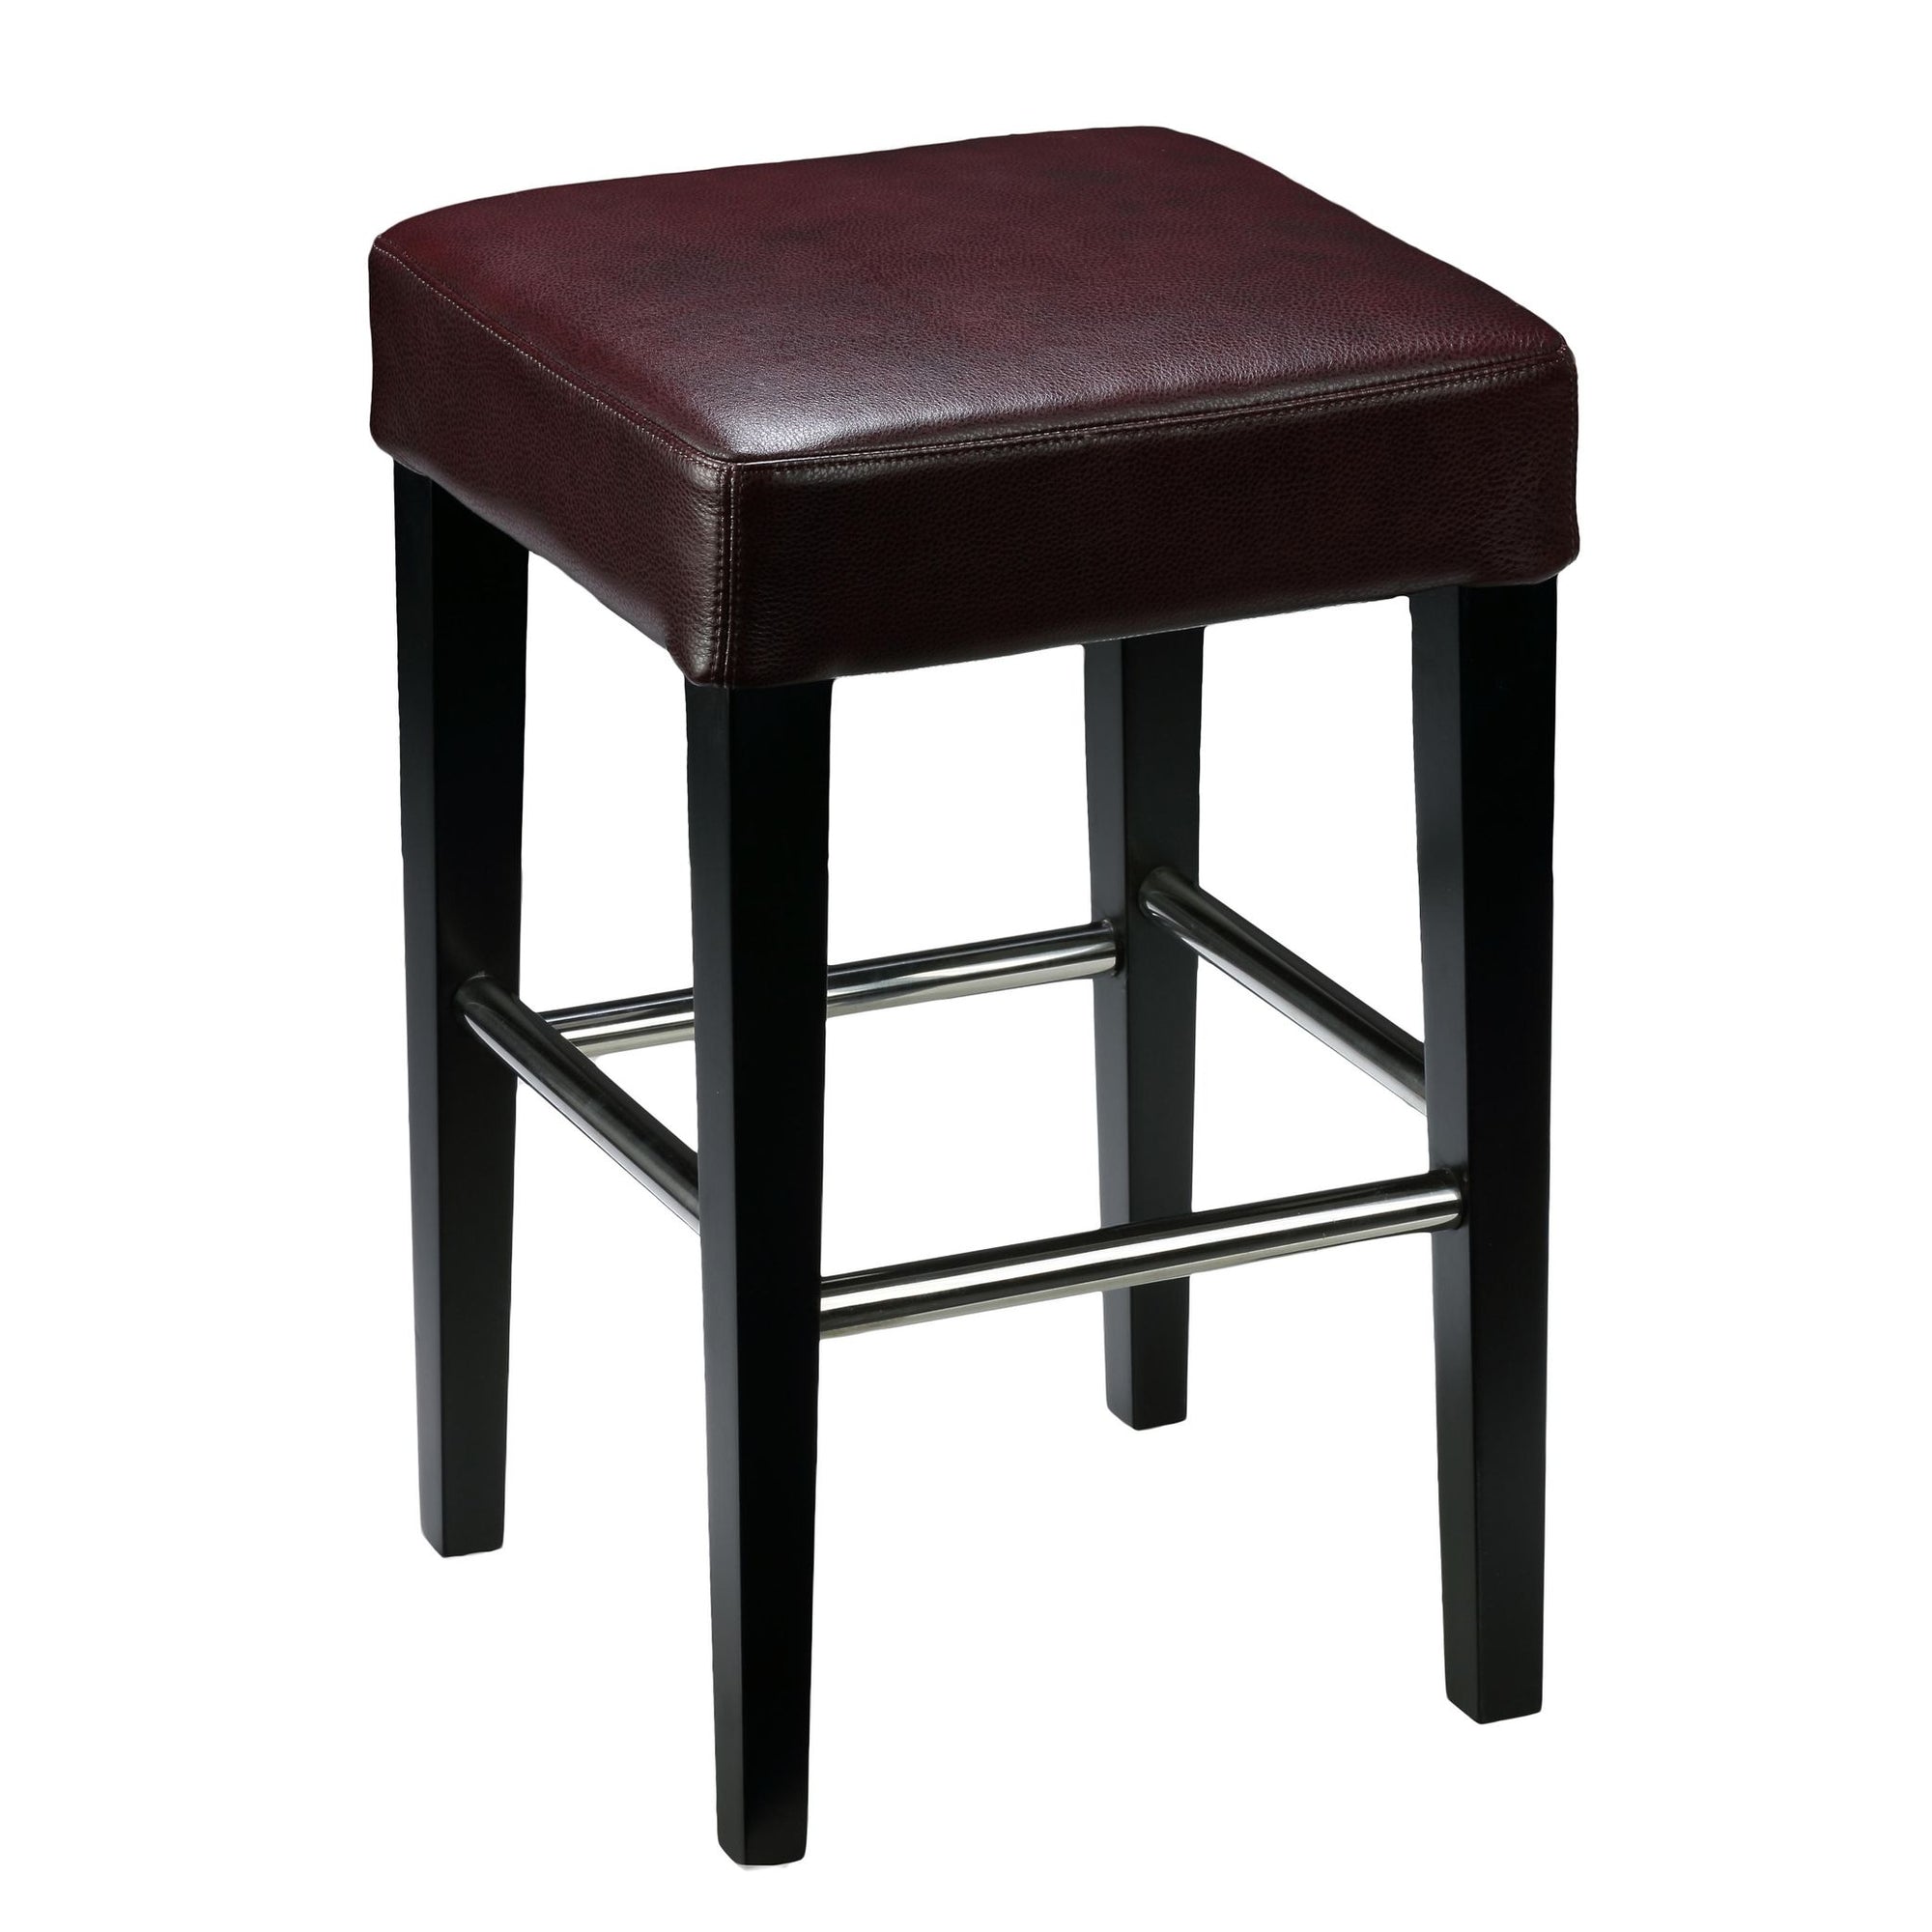 Cortesi Home Boulder Counter Stool in Genuine Leather with Black Legs, Merlot 24"